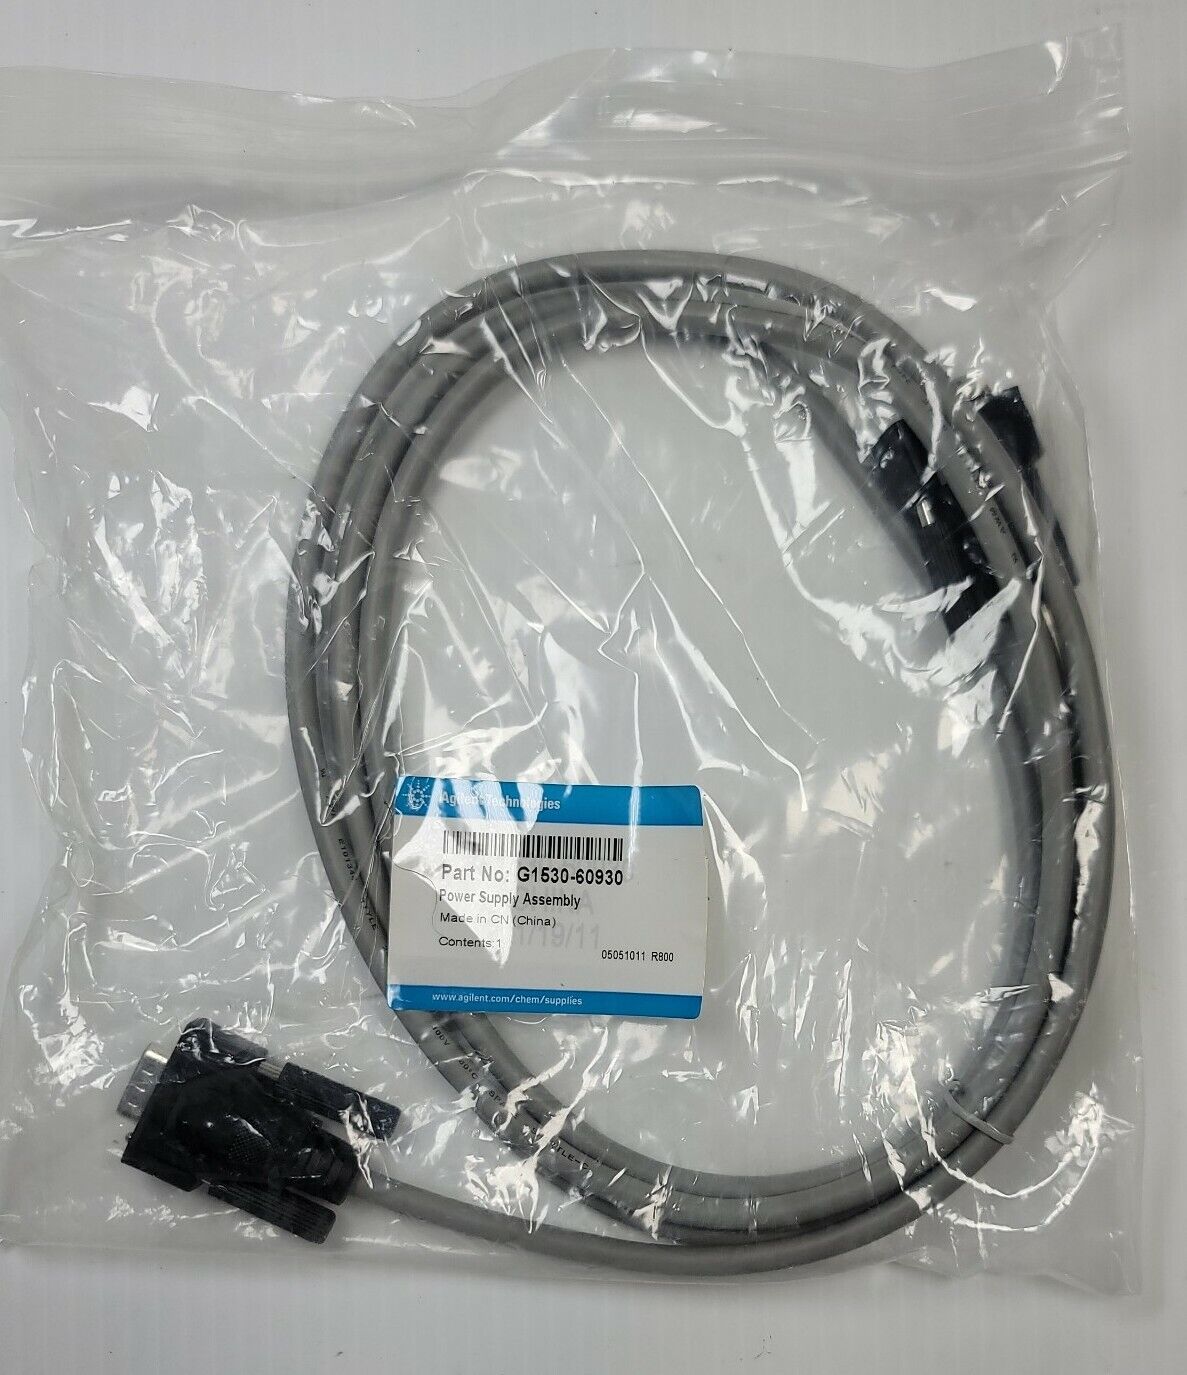 G1530-60930 Remote cable APG ,GC to 35900C, D, E/MSD/ #GG